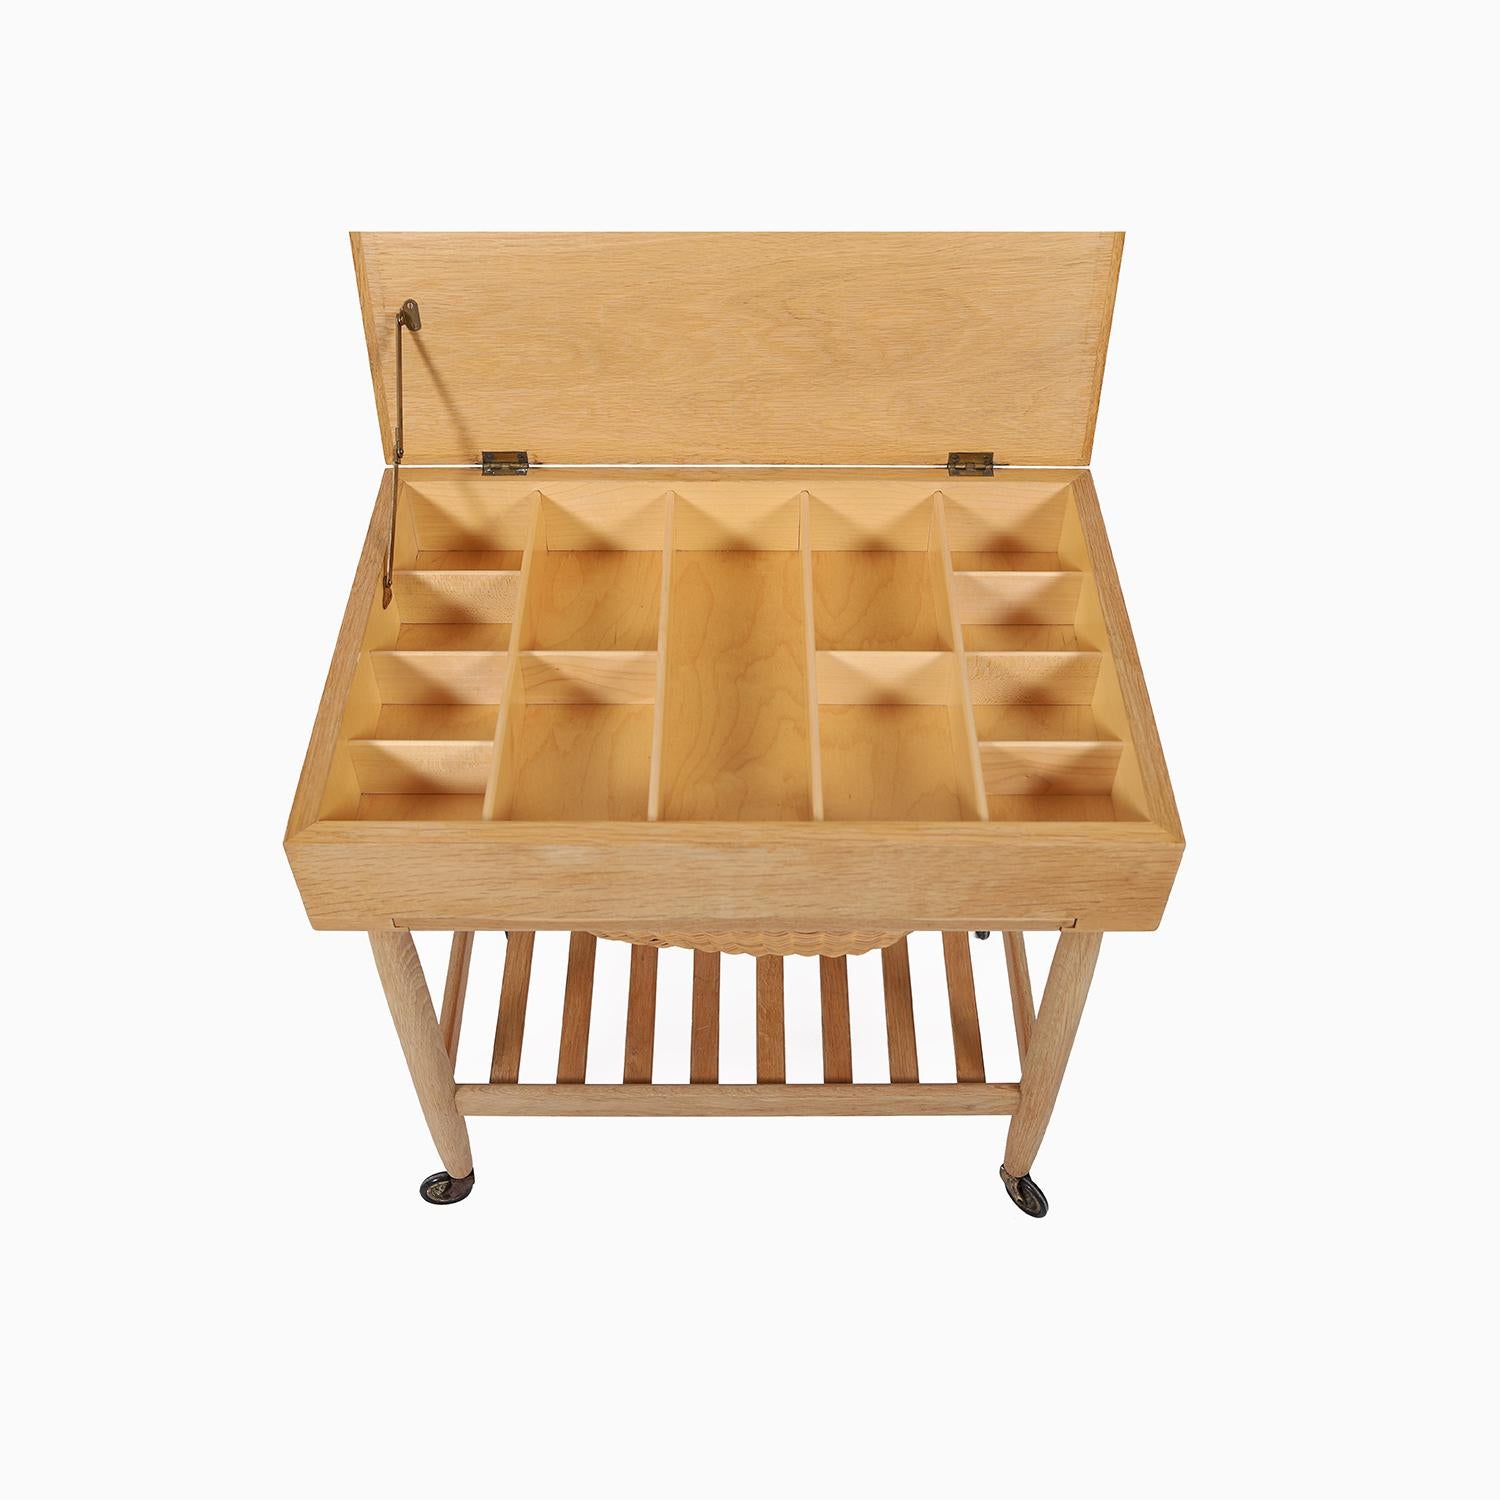 20th Century Danish Modern Ejvind Johansson Sewing Table For Sale